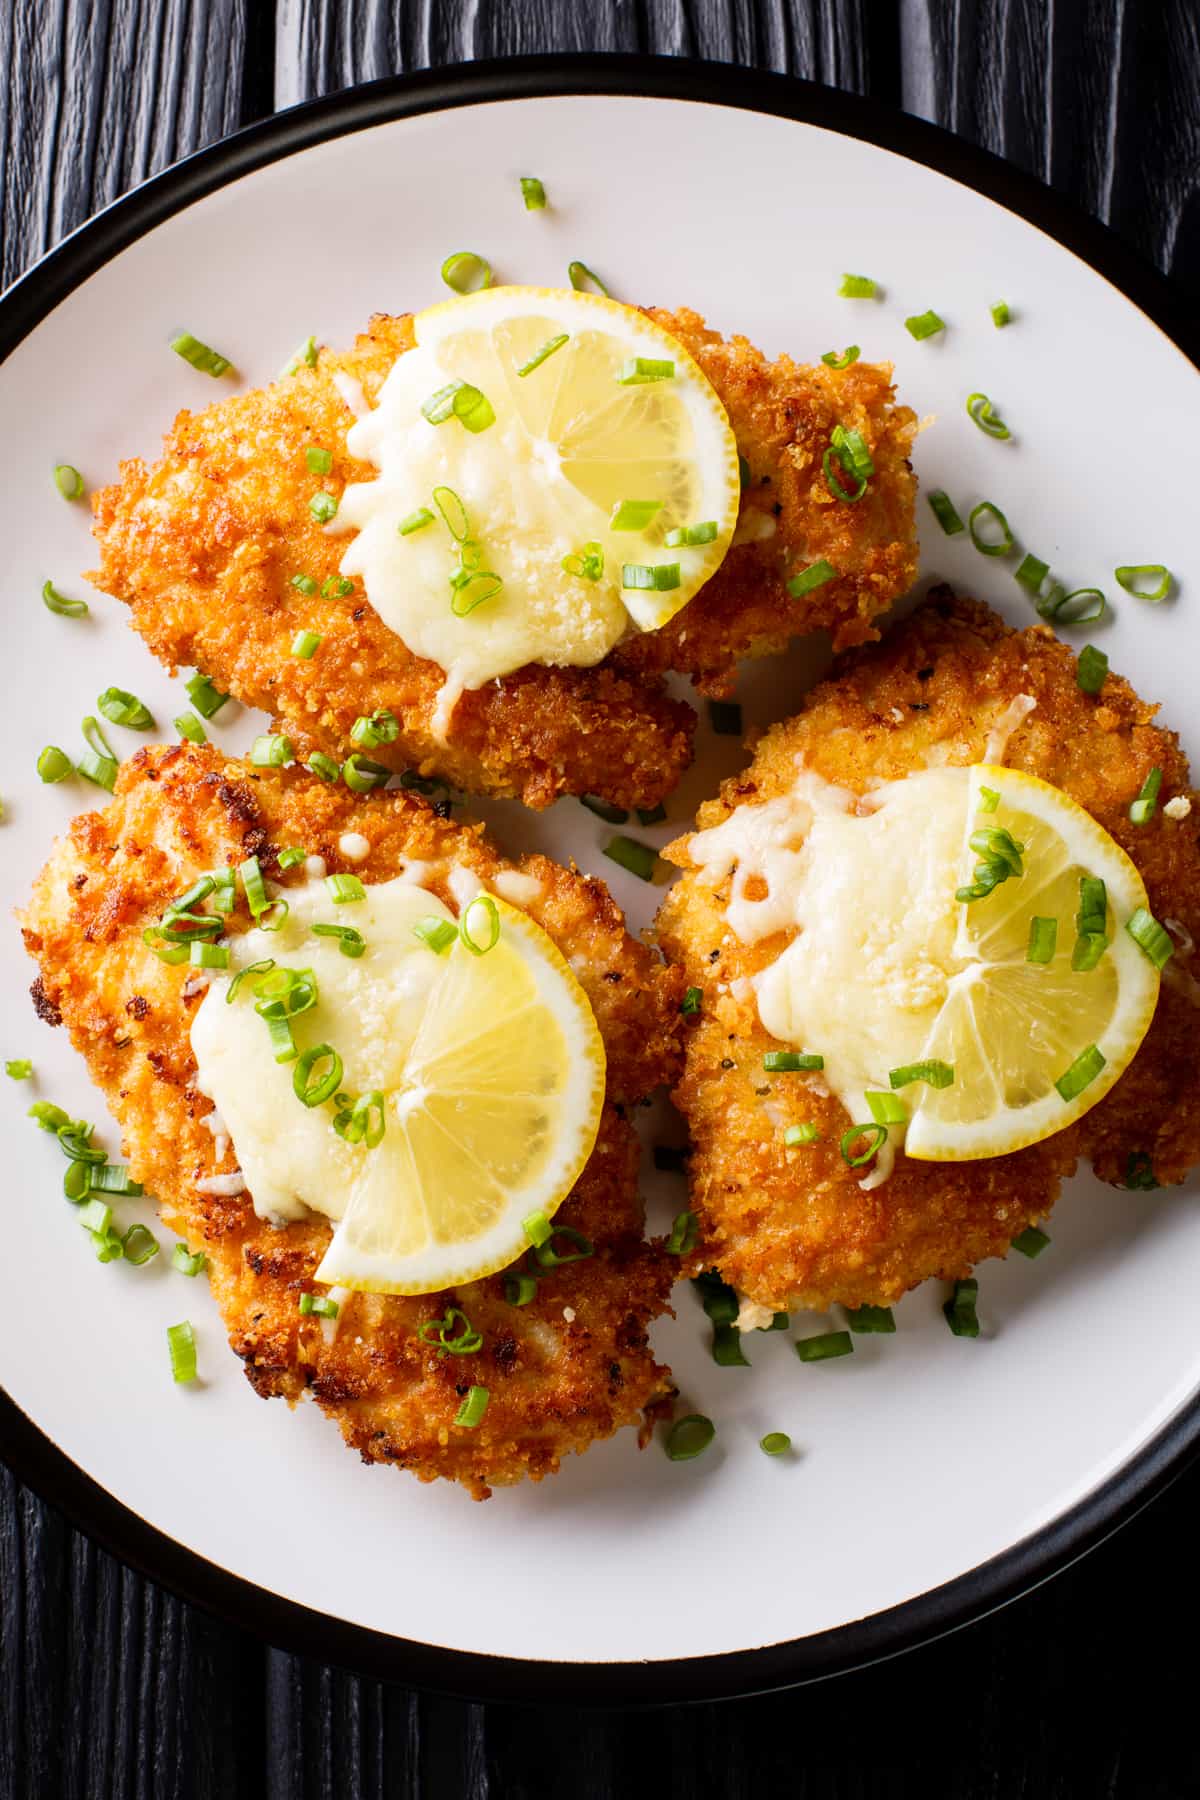 Overhead shot of three breaded chicken breasts, also known as chicken milanese, arranged on a plate and topped with lemon slices and chives.